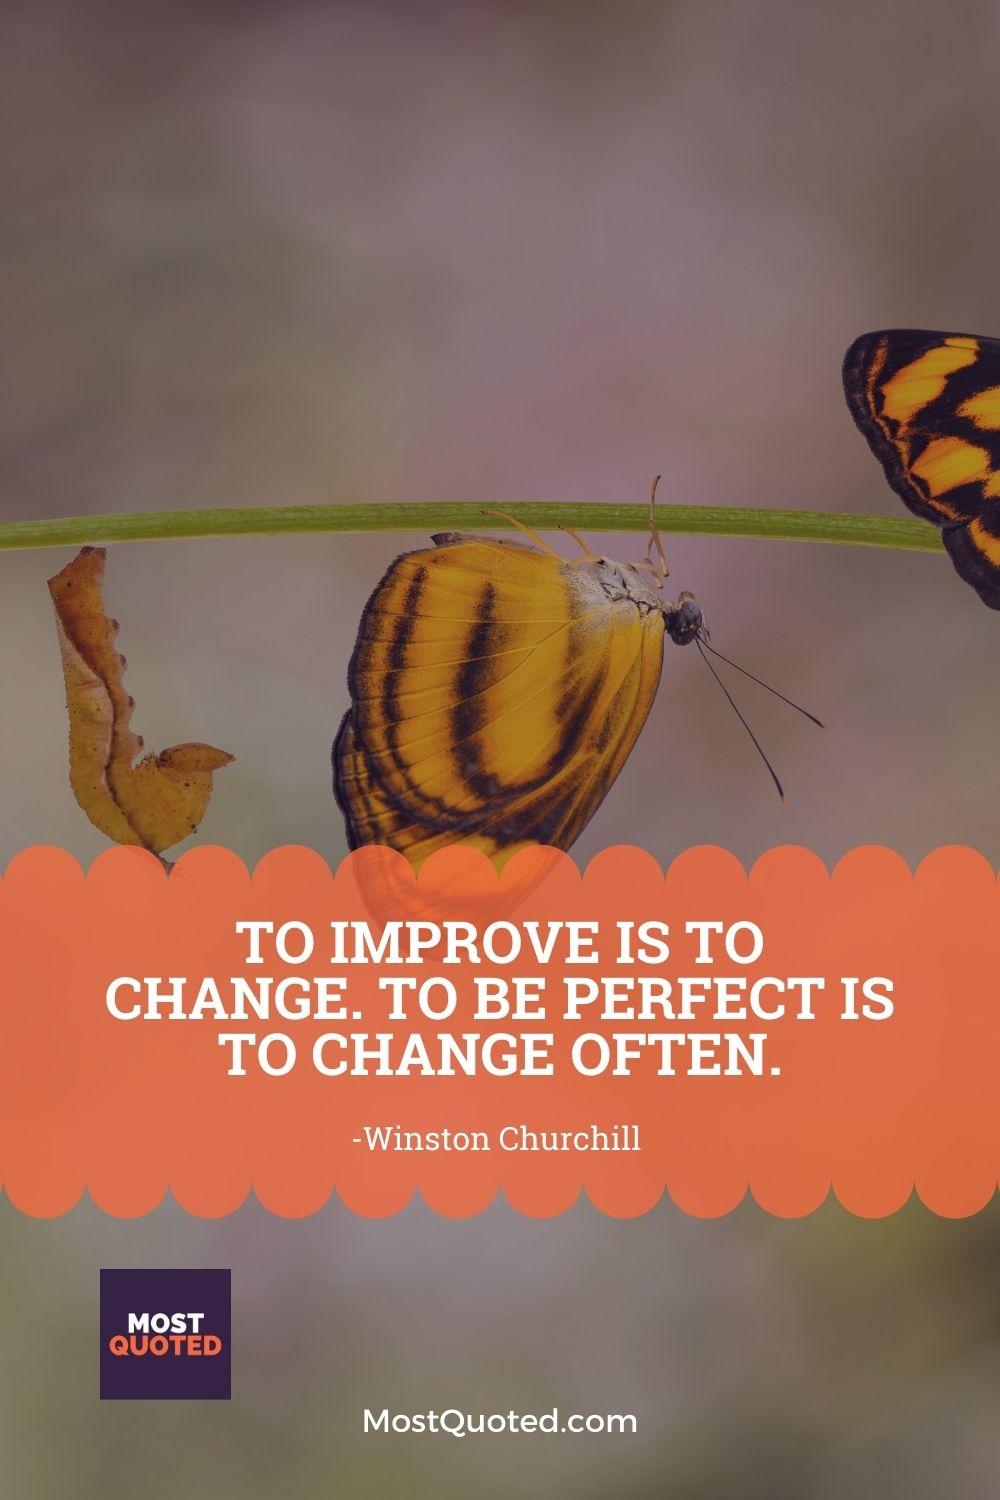 To improve is to change. To be perfect is to change often. - Winston Churchill